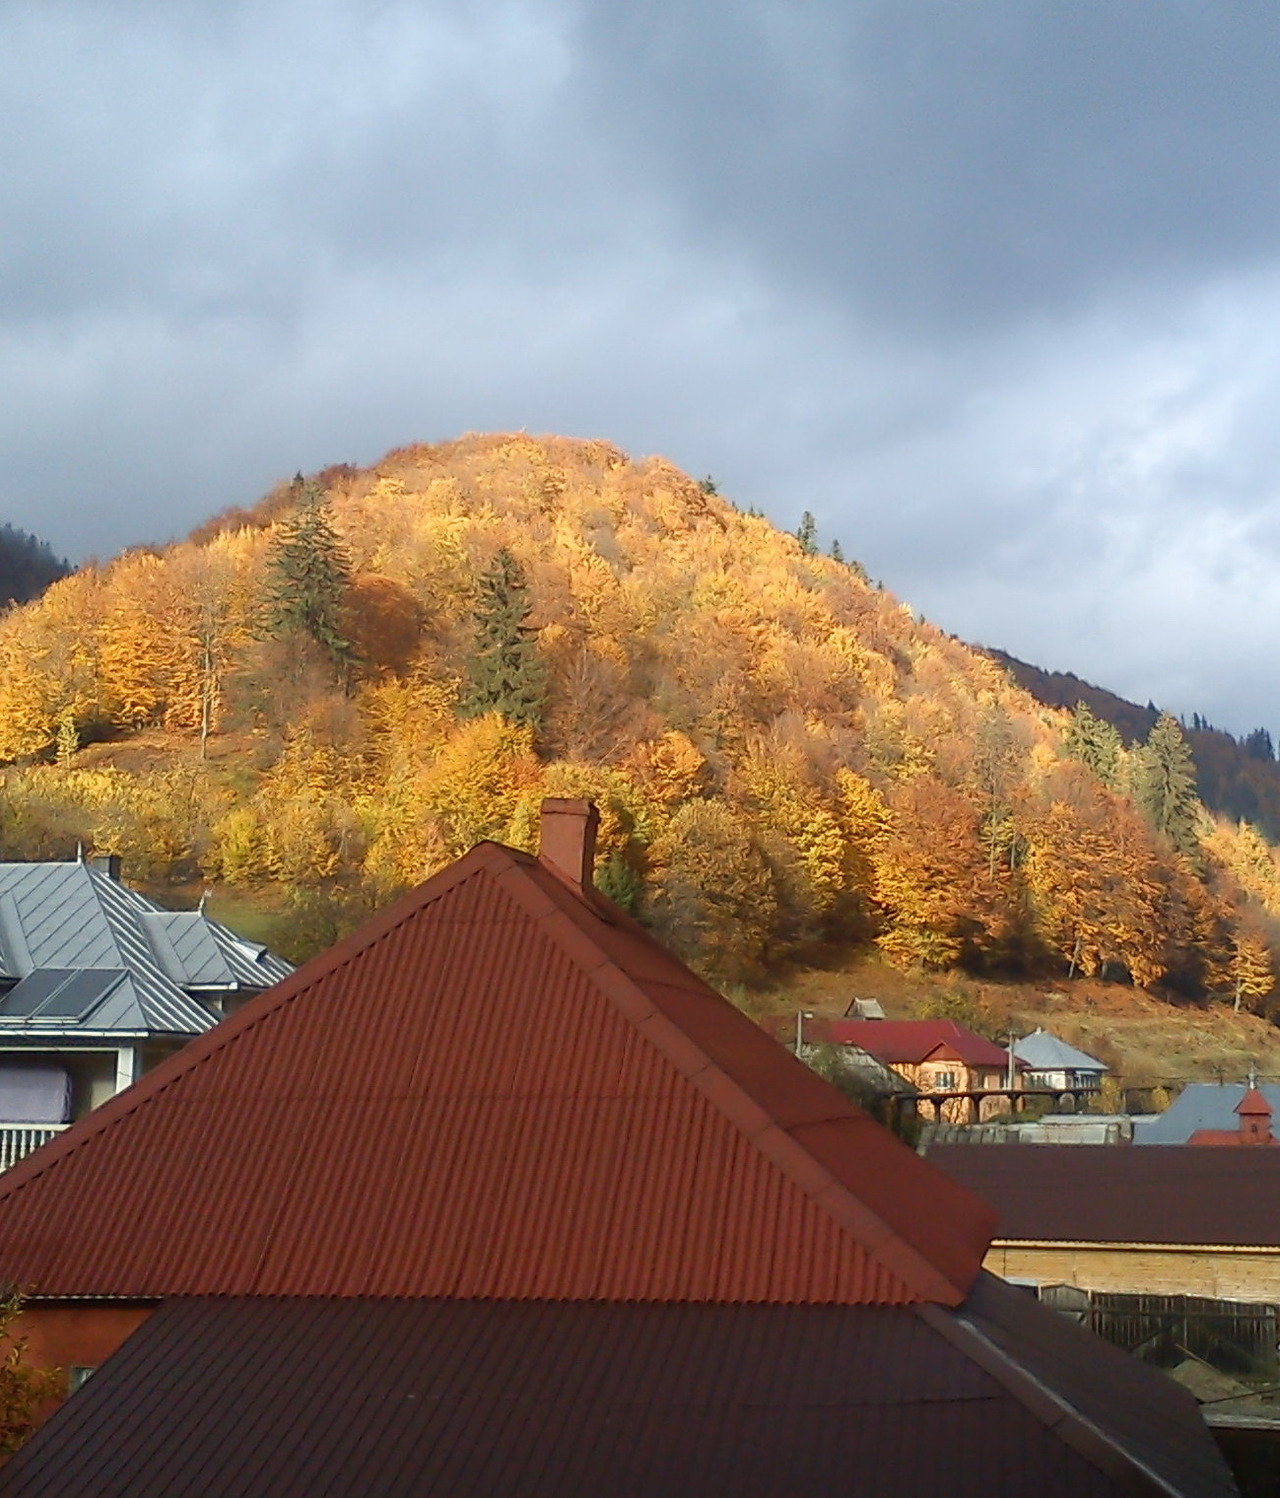 I just took this photo with my phone, this is how autumn looks like where I live :)